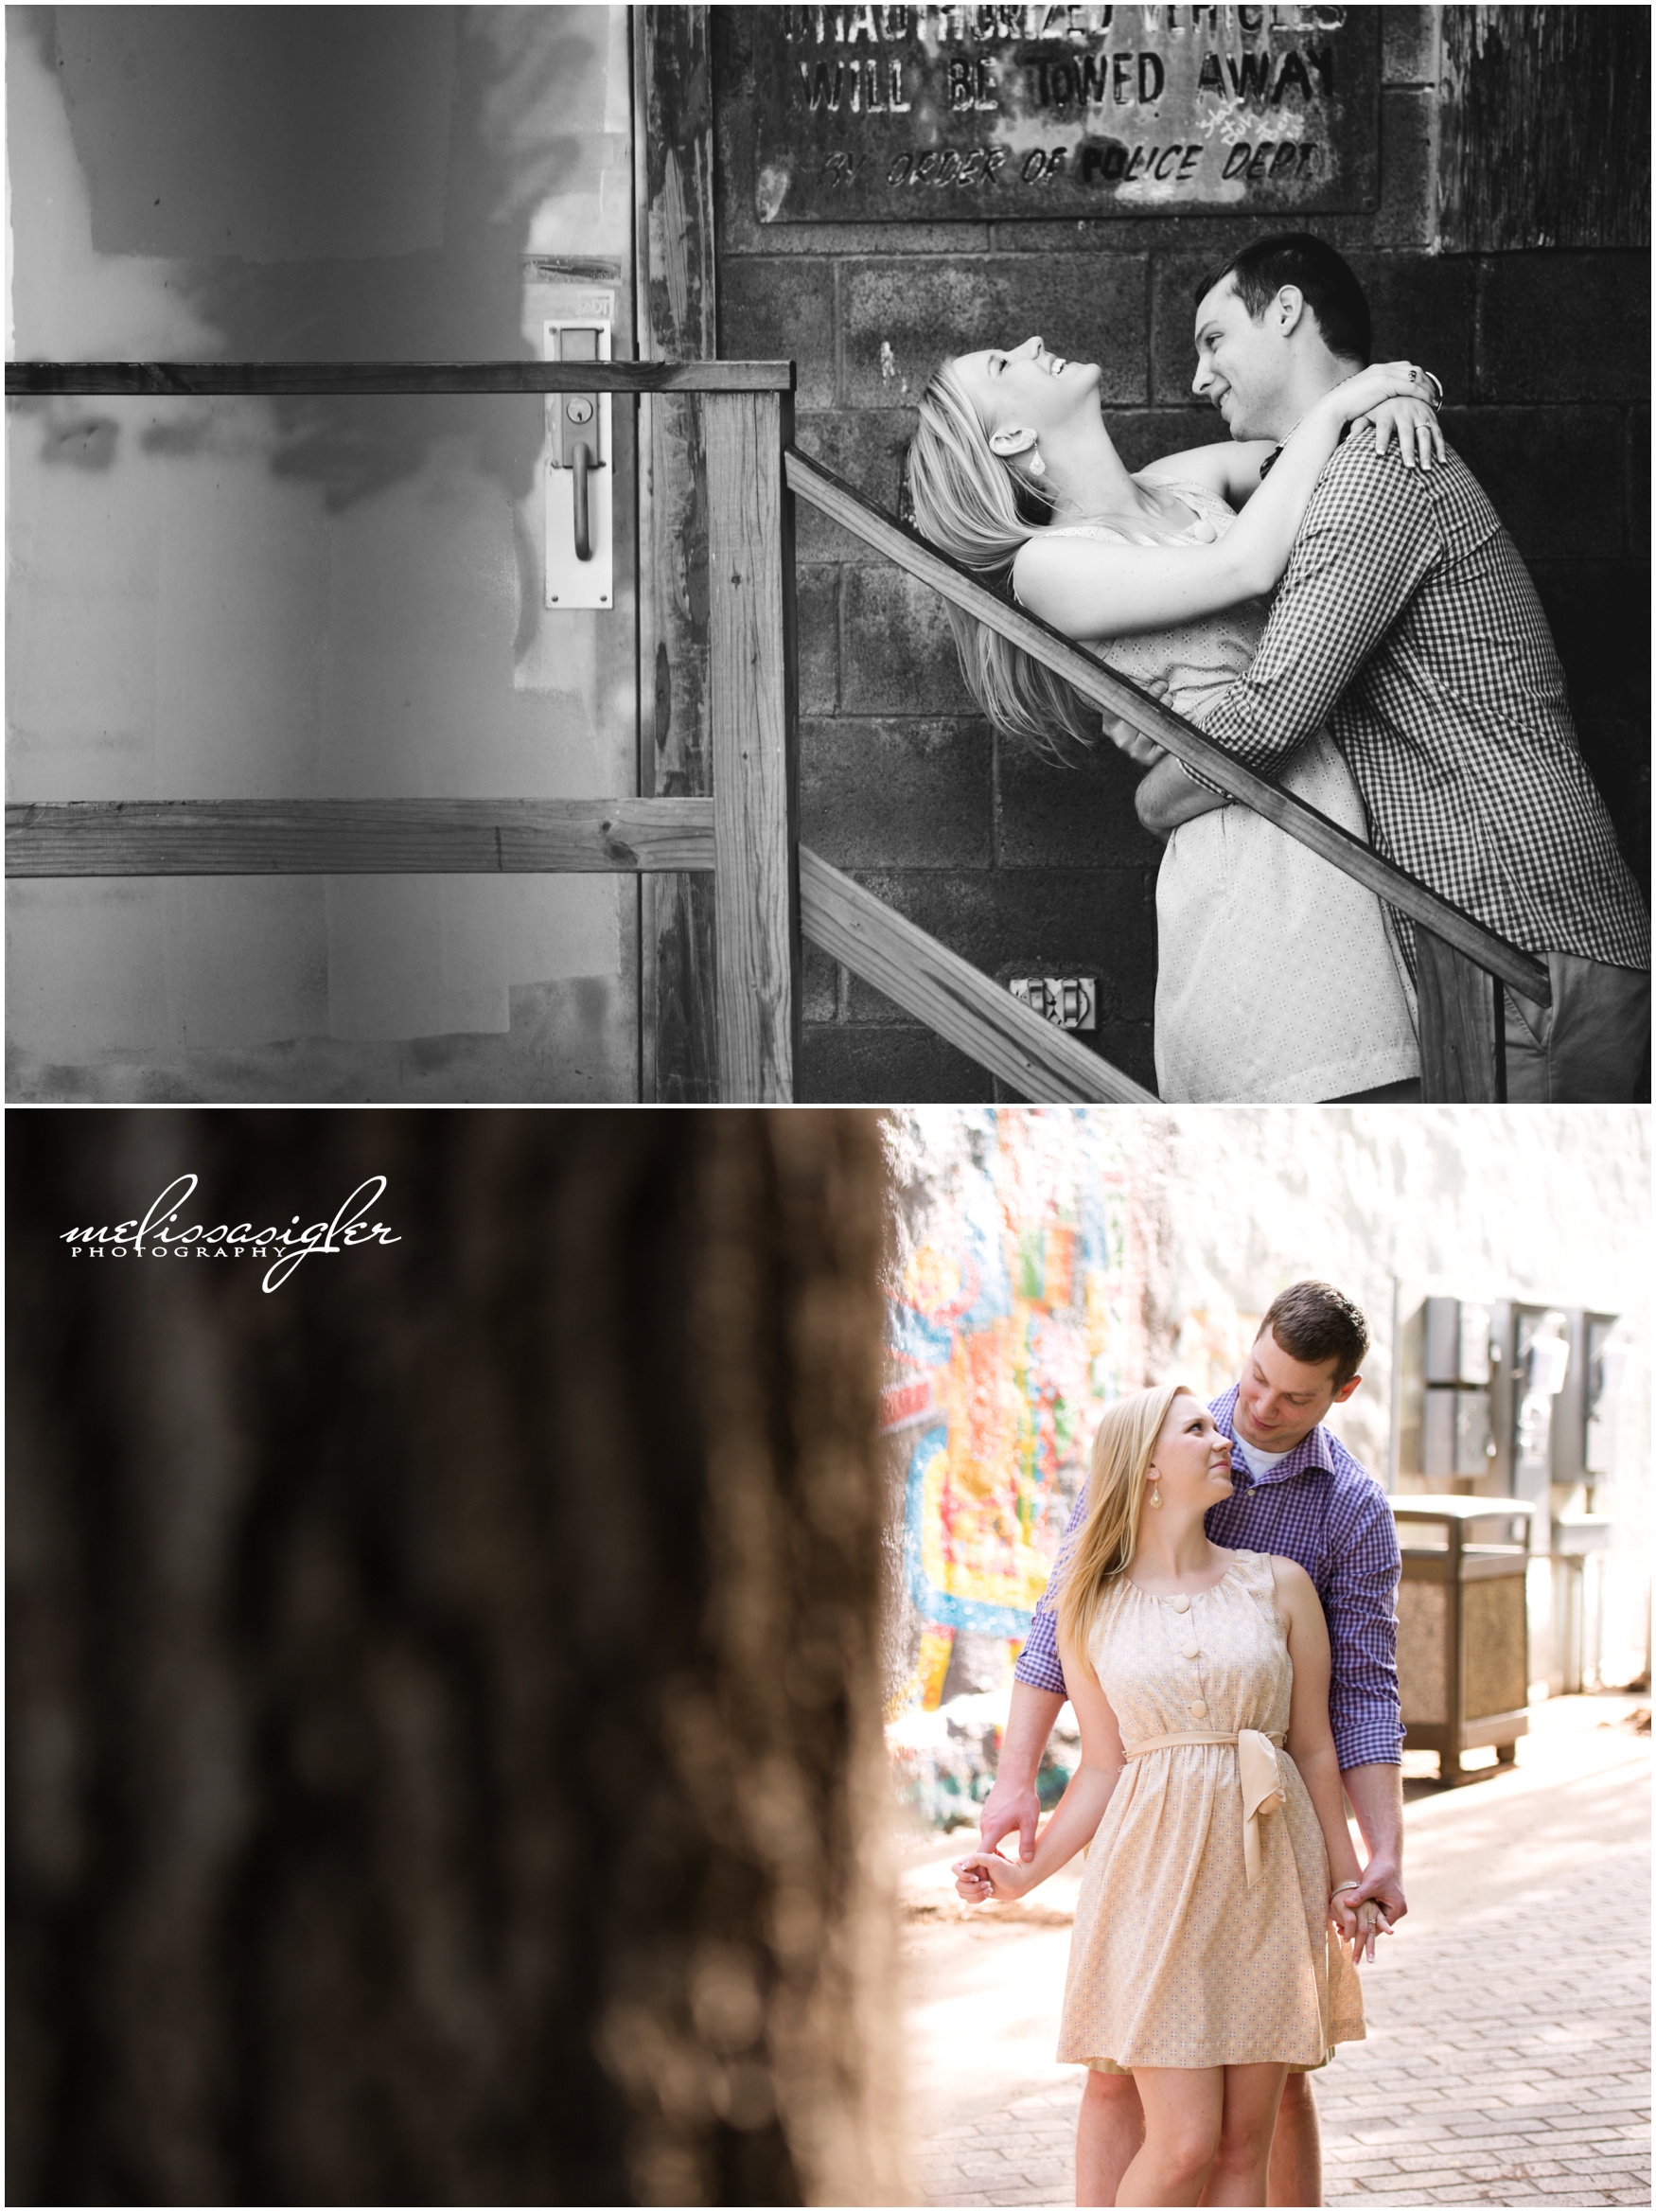 Downtown Lawrence Kansas engagement session by Melissa Sigler Photography